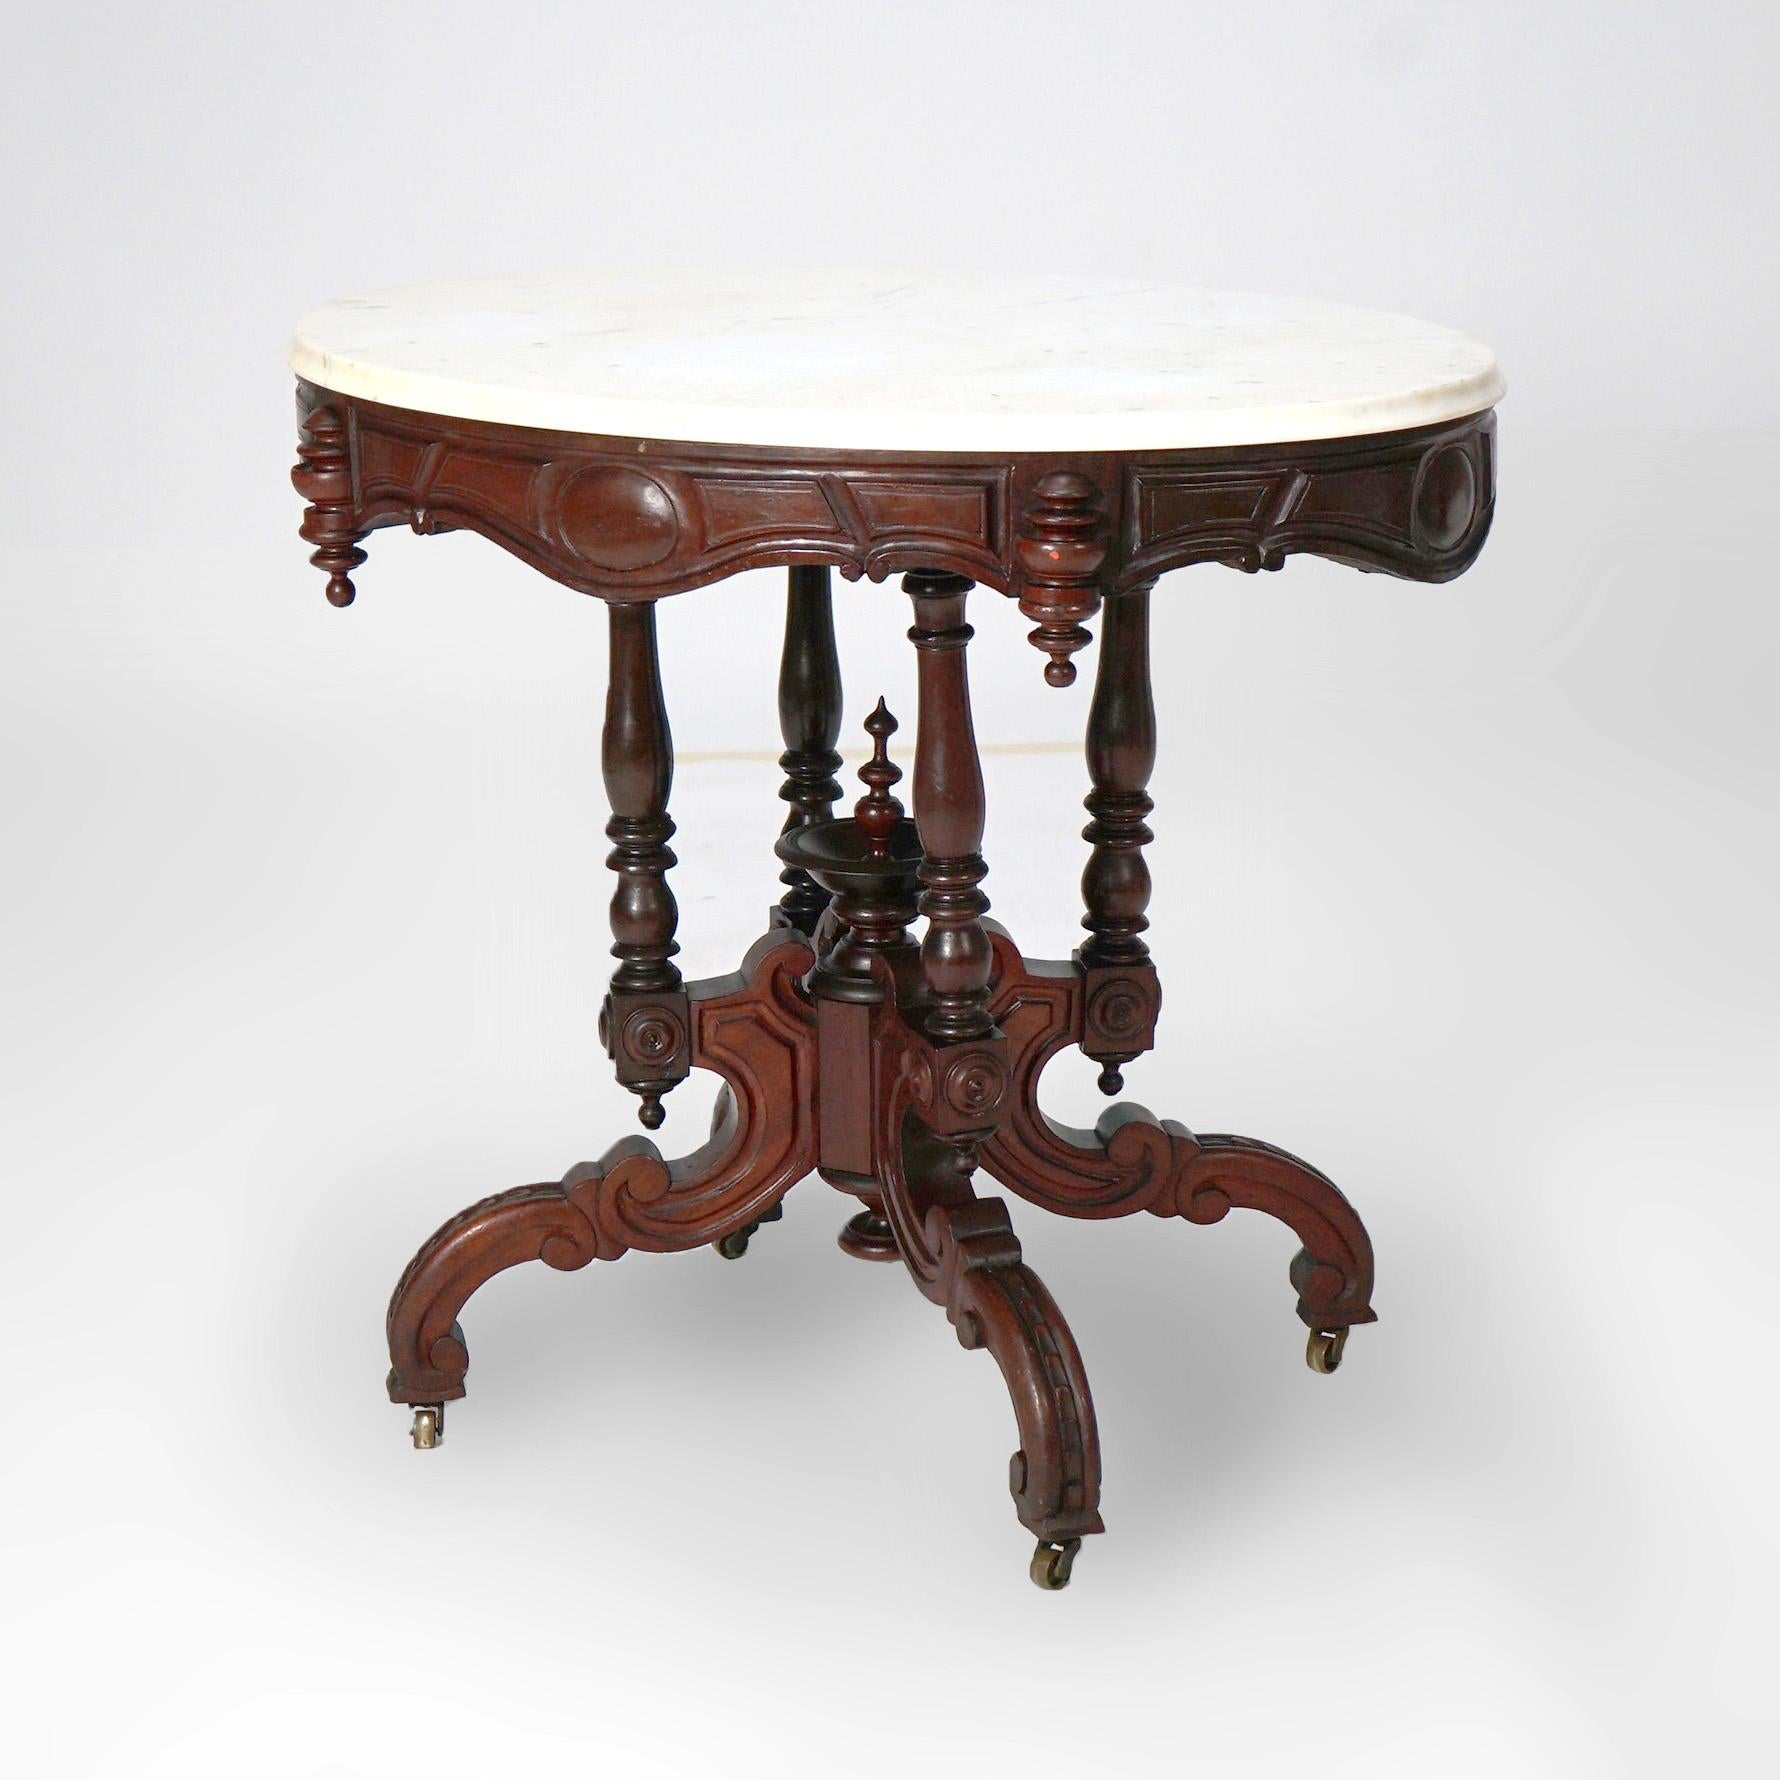 An antique Renaissance Revival Brooks parlor table offers beveled oval marble top over carved walnut base with shaped skirt having medallions and drop finials,  turned balustrade supports with central urn form finial, and raised on scroll form legs,